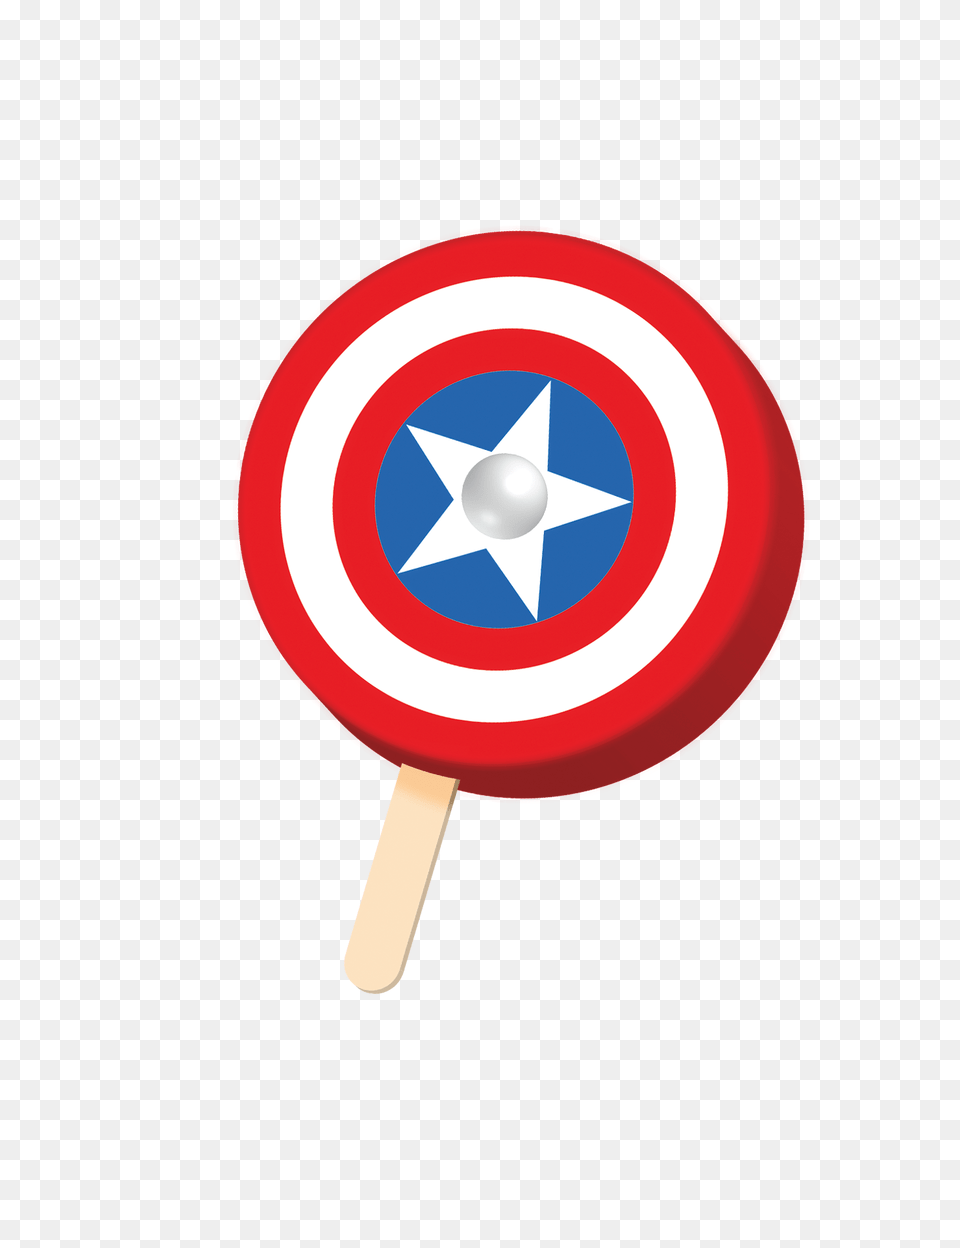 Avengers Captain America Face Bar No Label, Armor, Shield Free Png Download